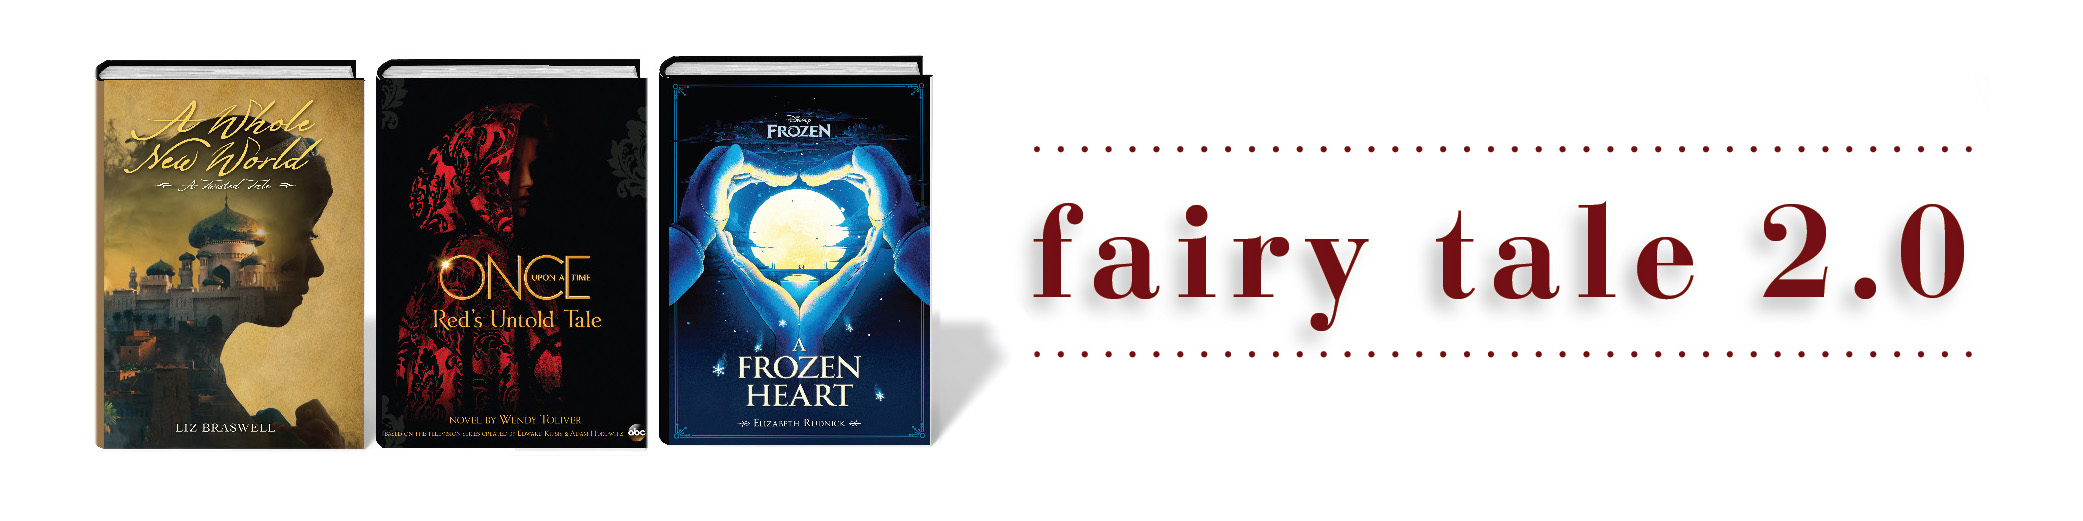 Disney Hyperion Fairy Tale 2.0 Campaign Launch and Giveaway!